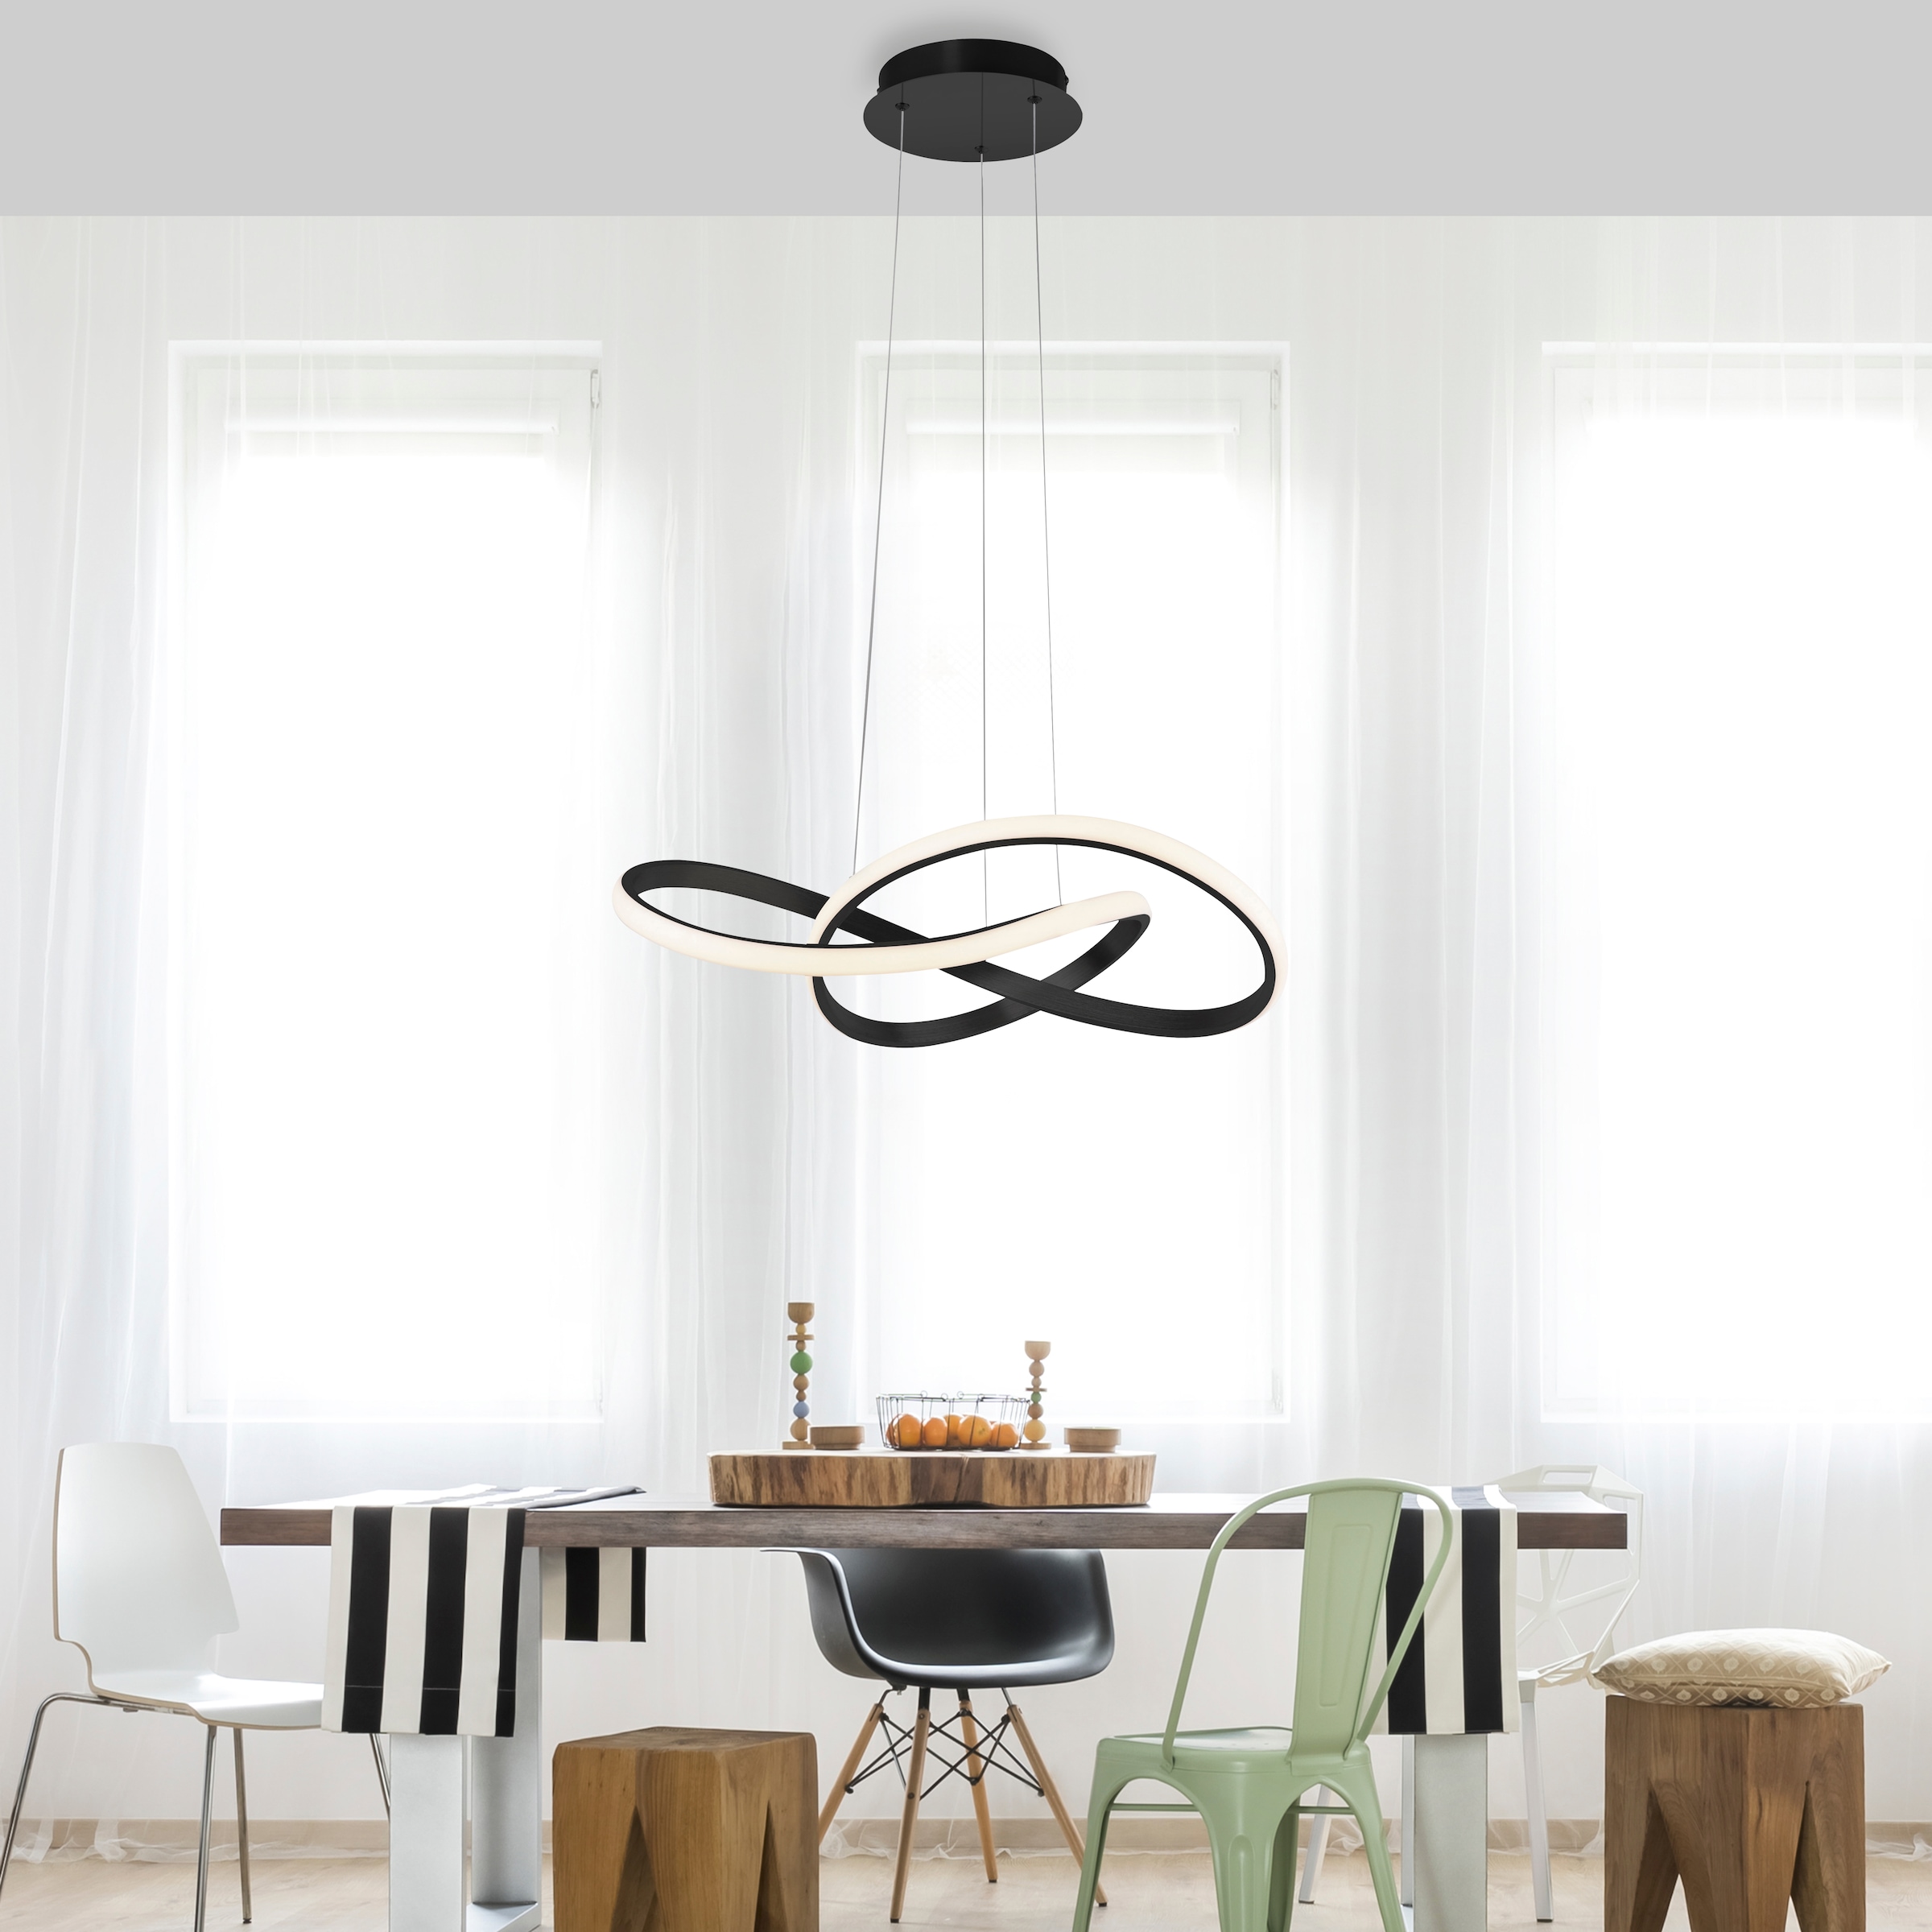 JUST LIGHT Pendelleuchte dimmbar, Switchmo OTTO 1 flammig-flammig, bei online »MARIA«, LED